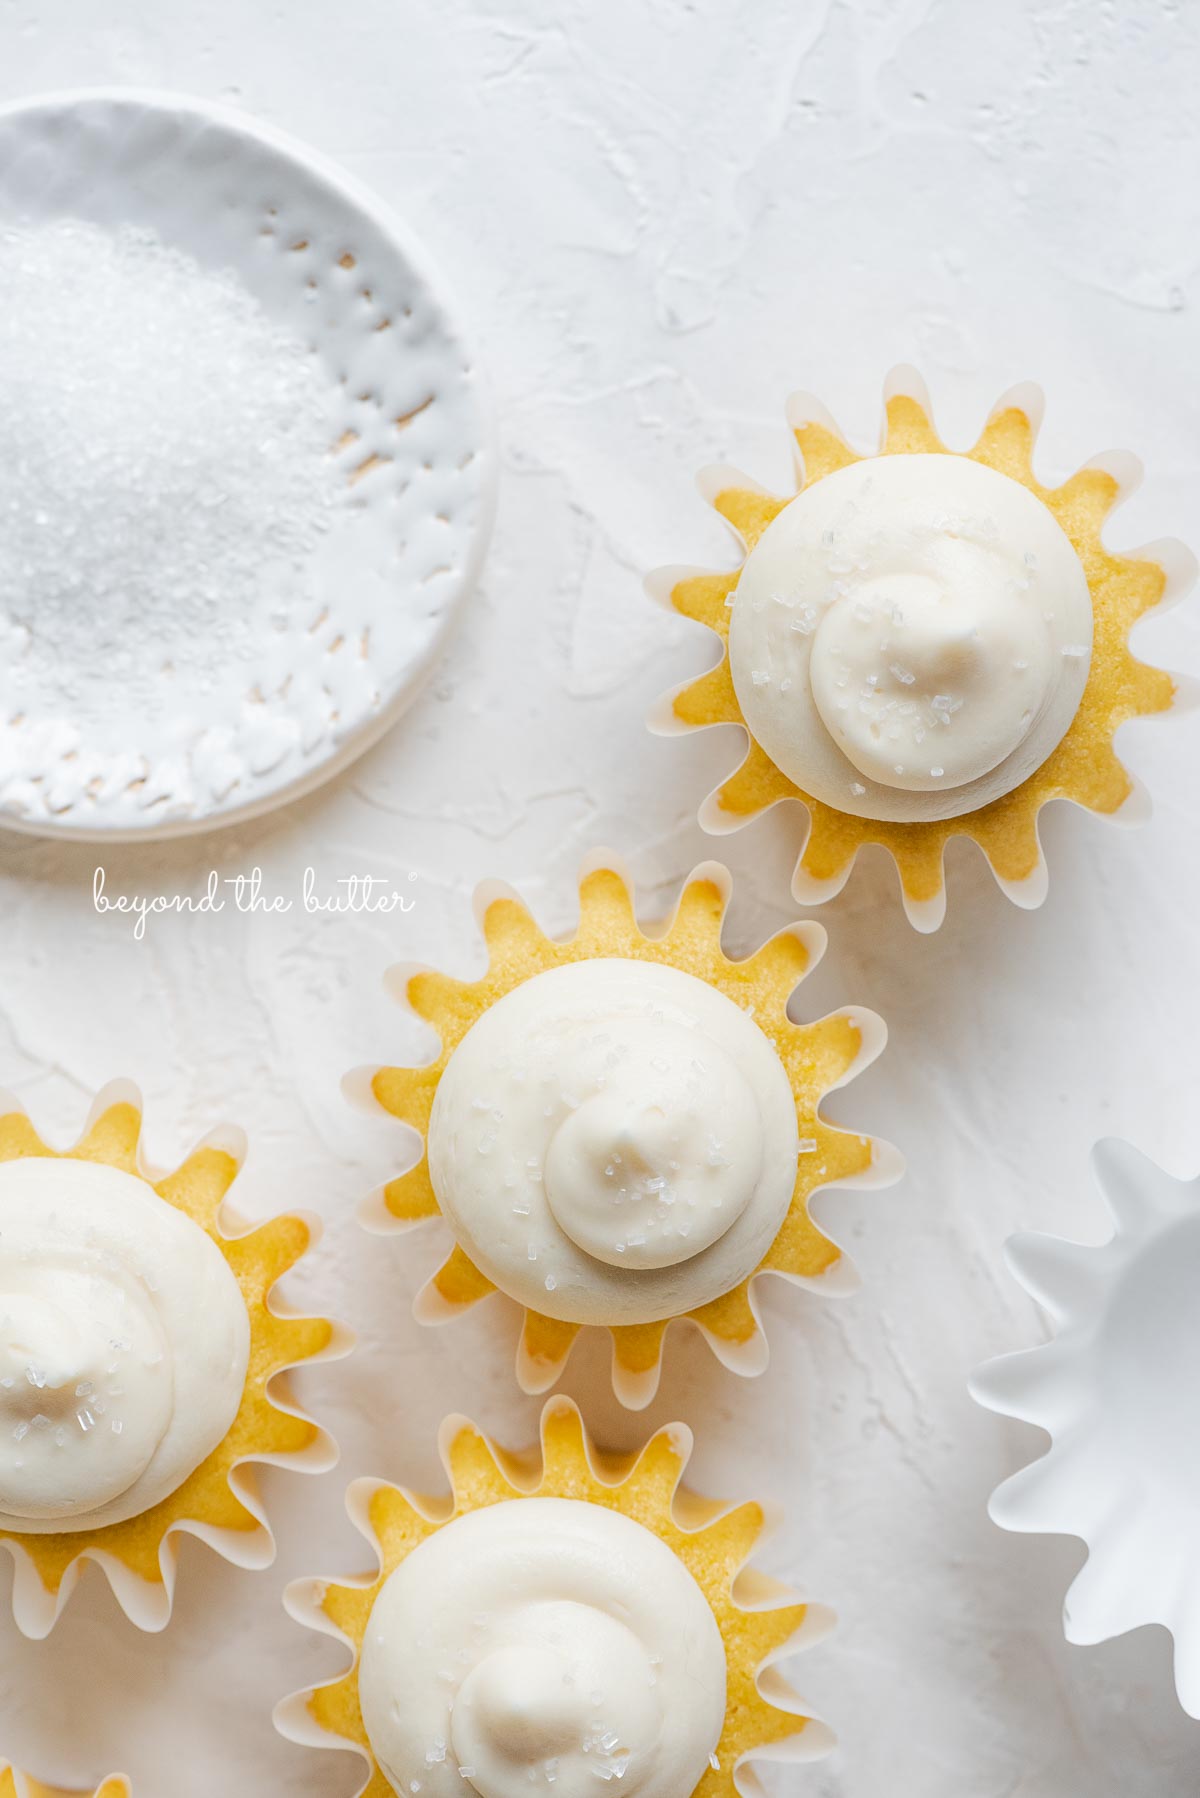 Overhead image of frosted vanilla cupcakes sprinkled with sparkling sugar randomly placed on white background next to empty cupcake liner and small shallow bowl of white sparkling sugar.